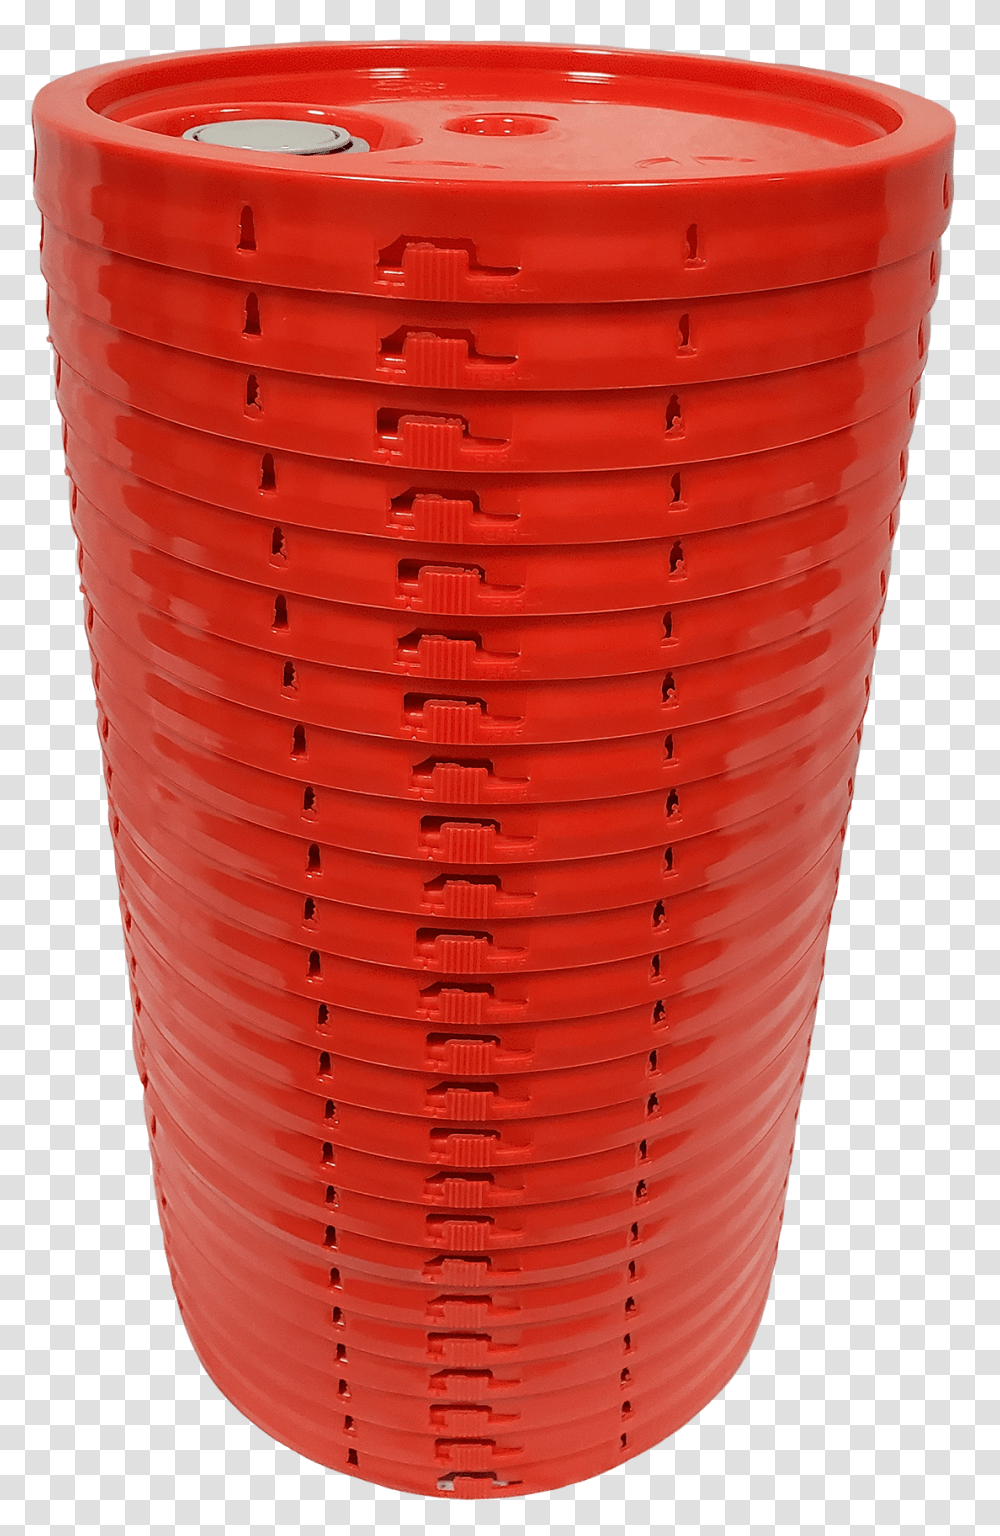 Red Plastic Lid With Gasket Tear Tab And Rieke Spout Flowerpot, Cup, Bottle, Cylinder, Mailbox Transparent Png